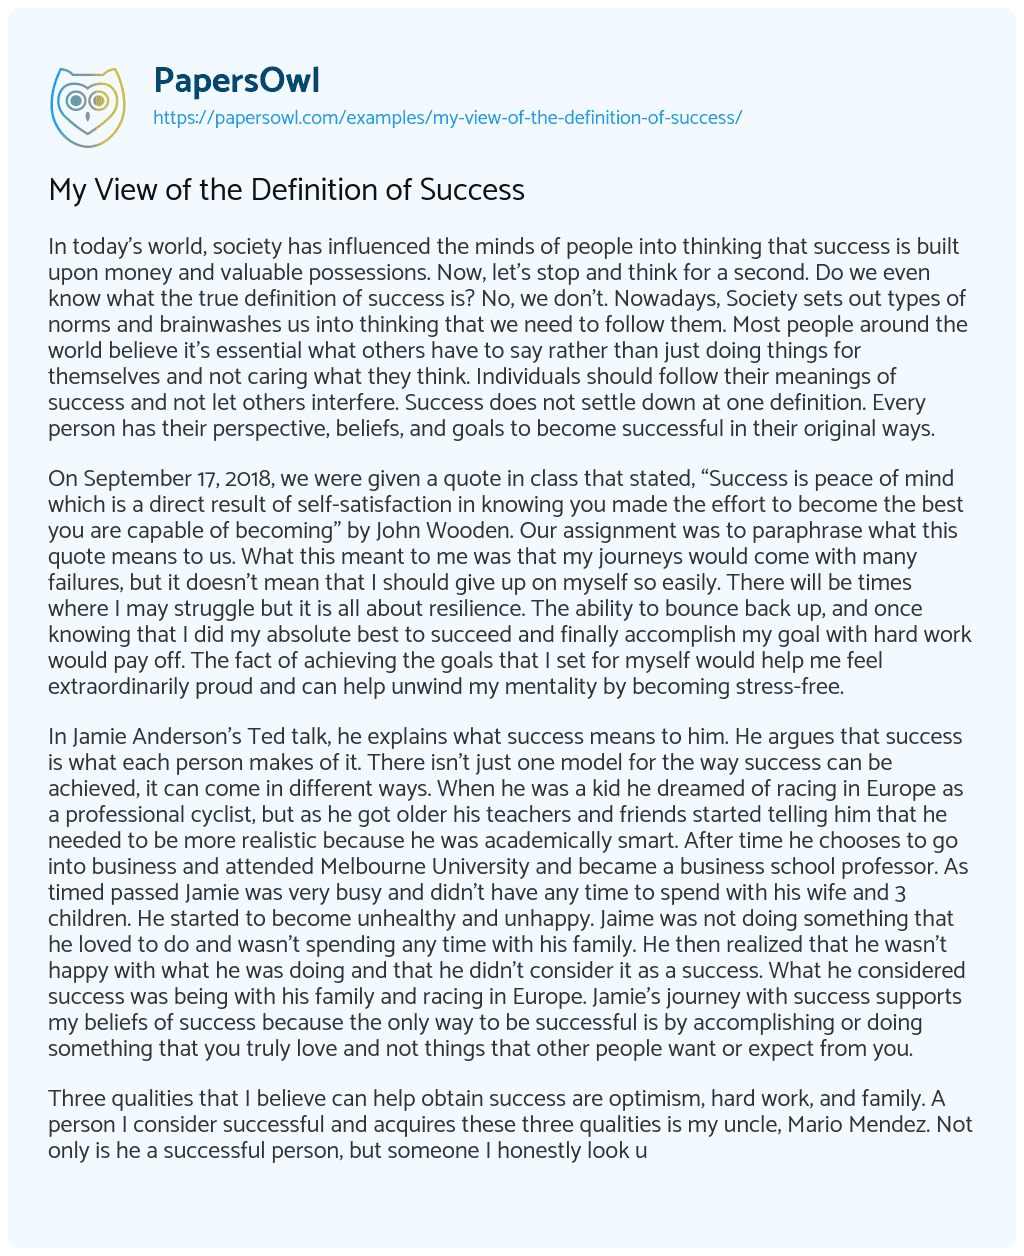 Essay on My View of the Definition of Success